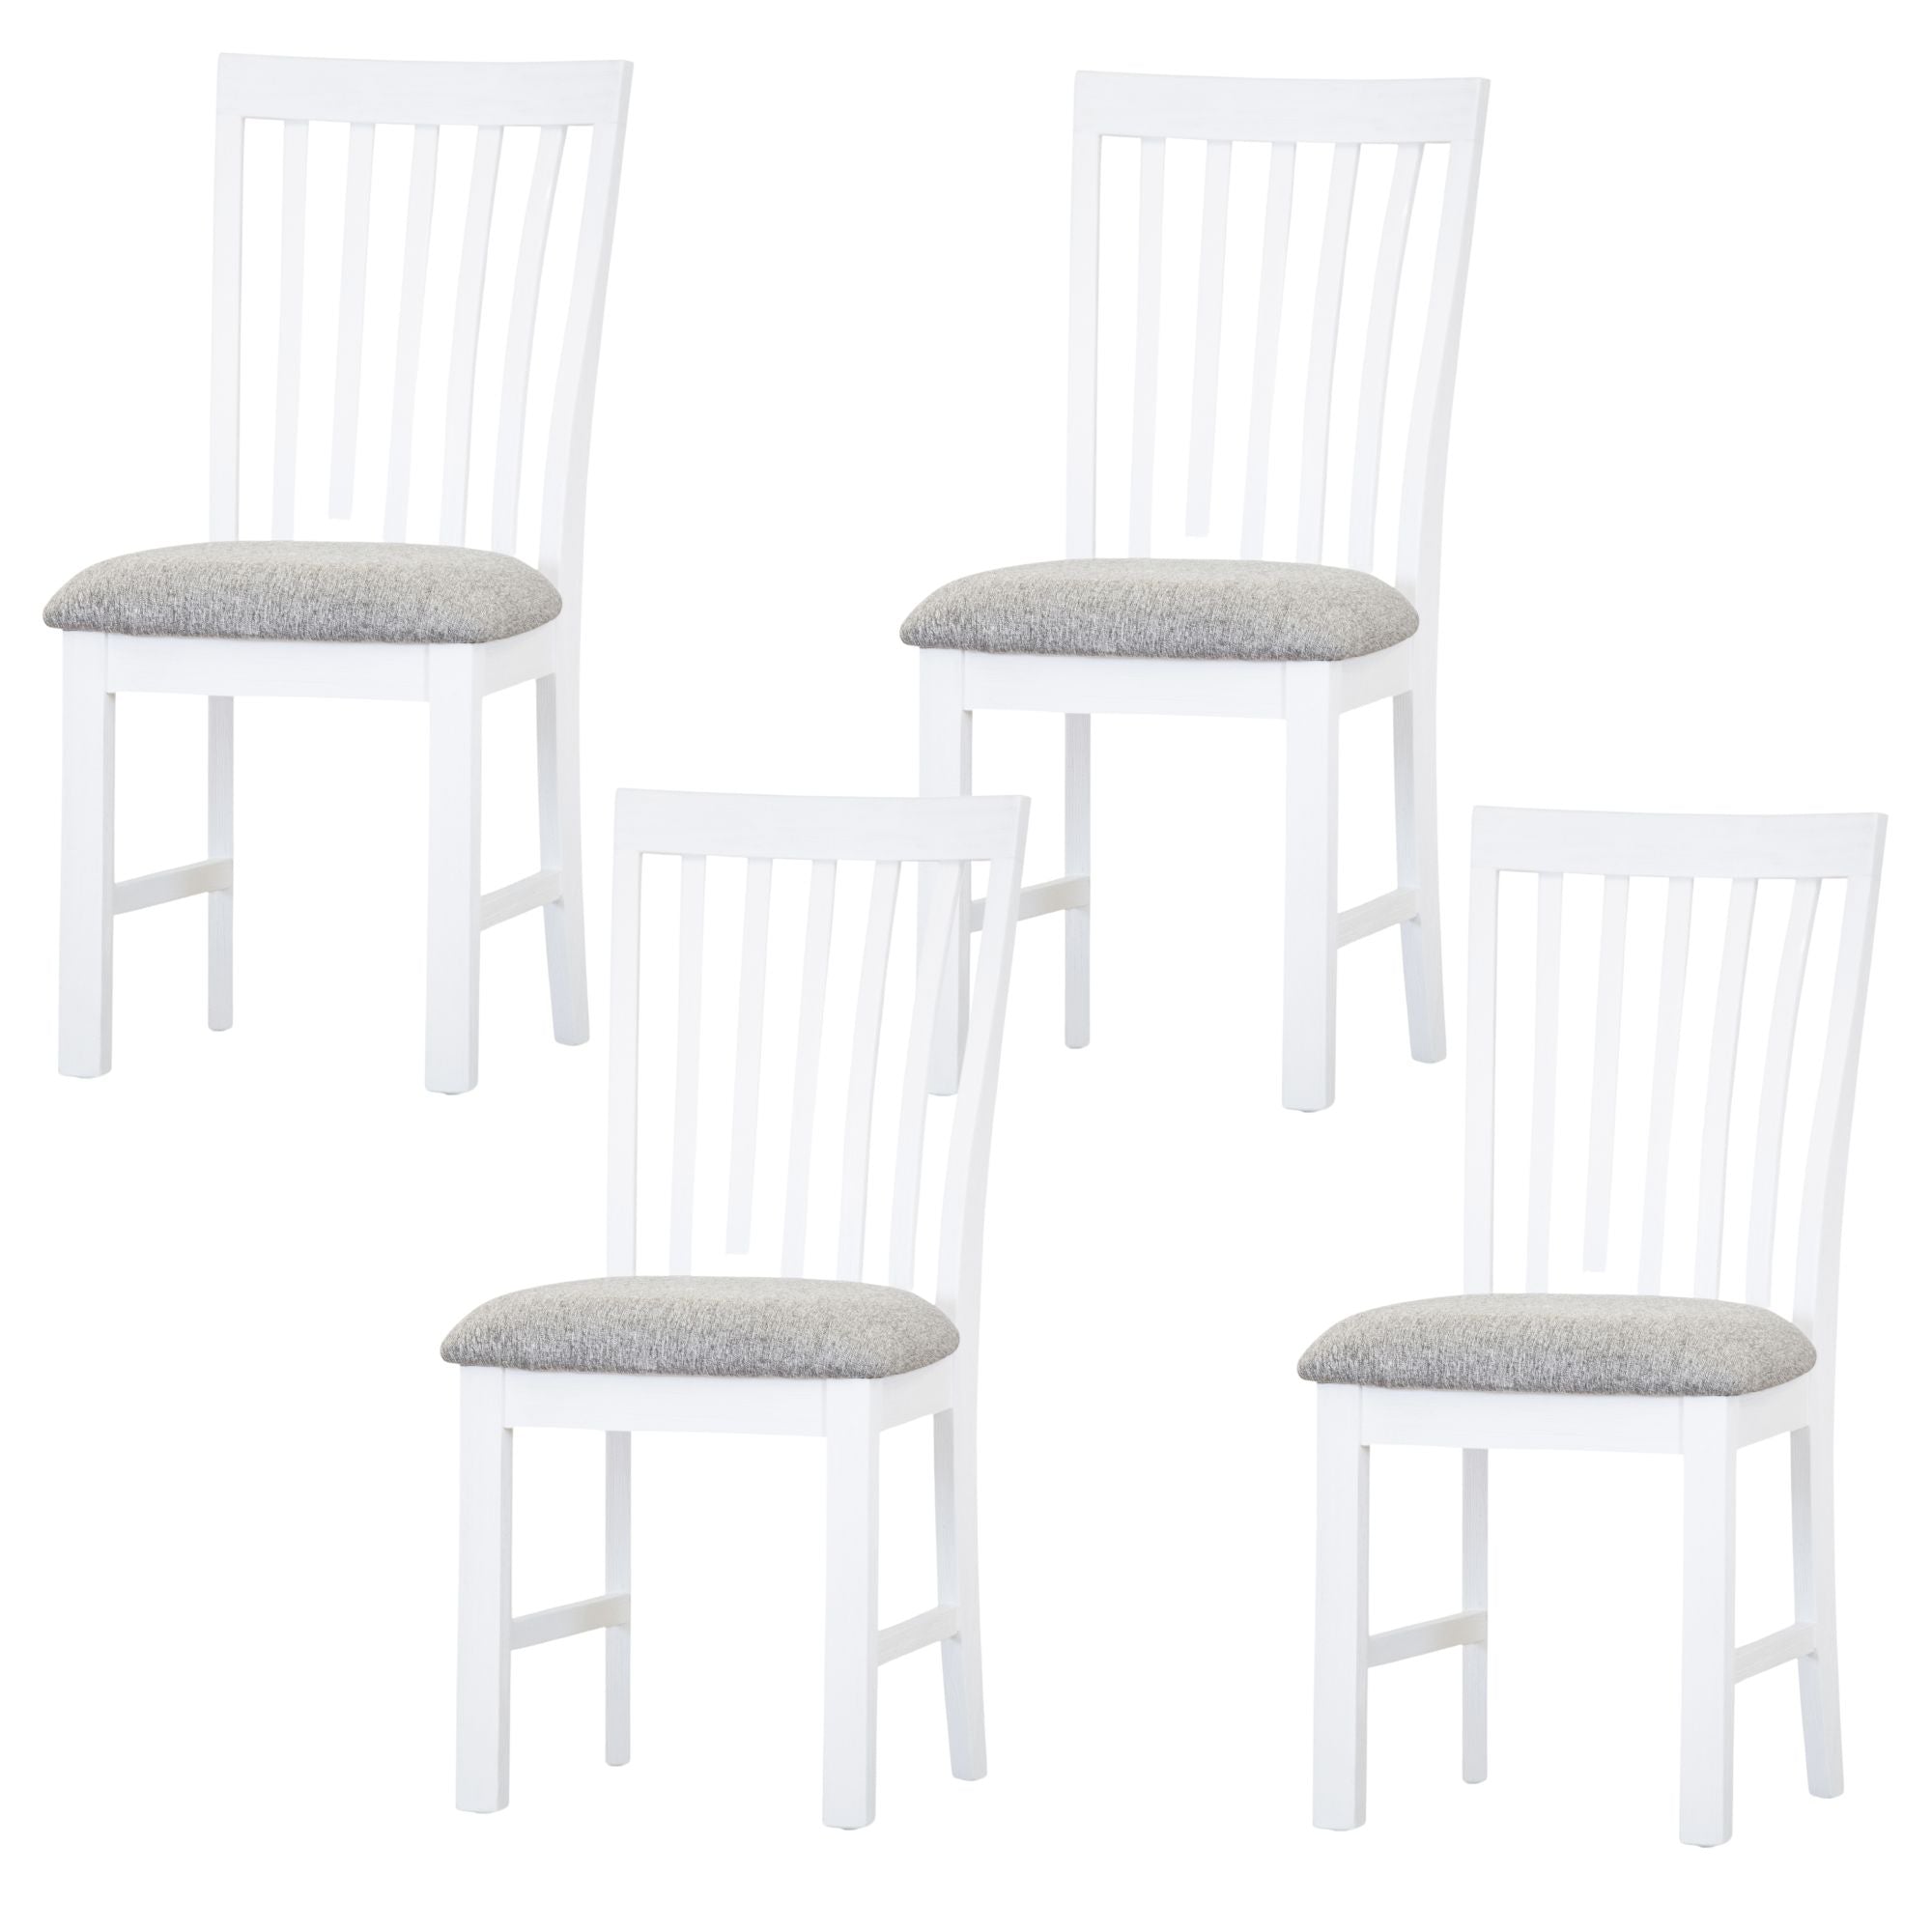 Laelia Dining Chair Set of 4 Solid Acacia Timber Wood Coastal Furniture - White Deals499